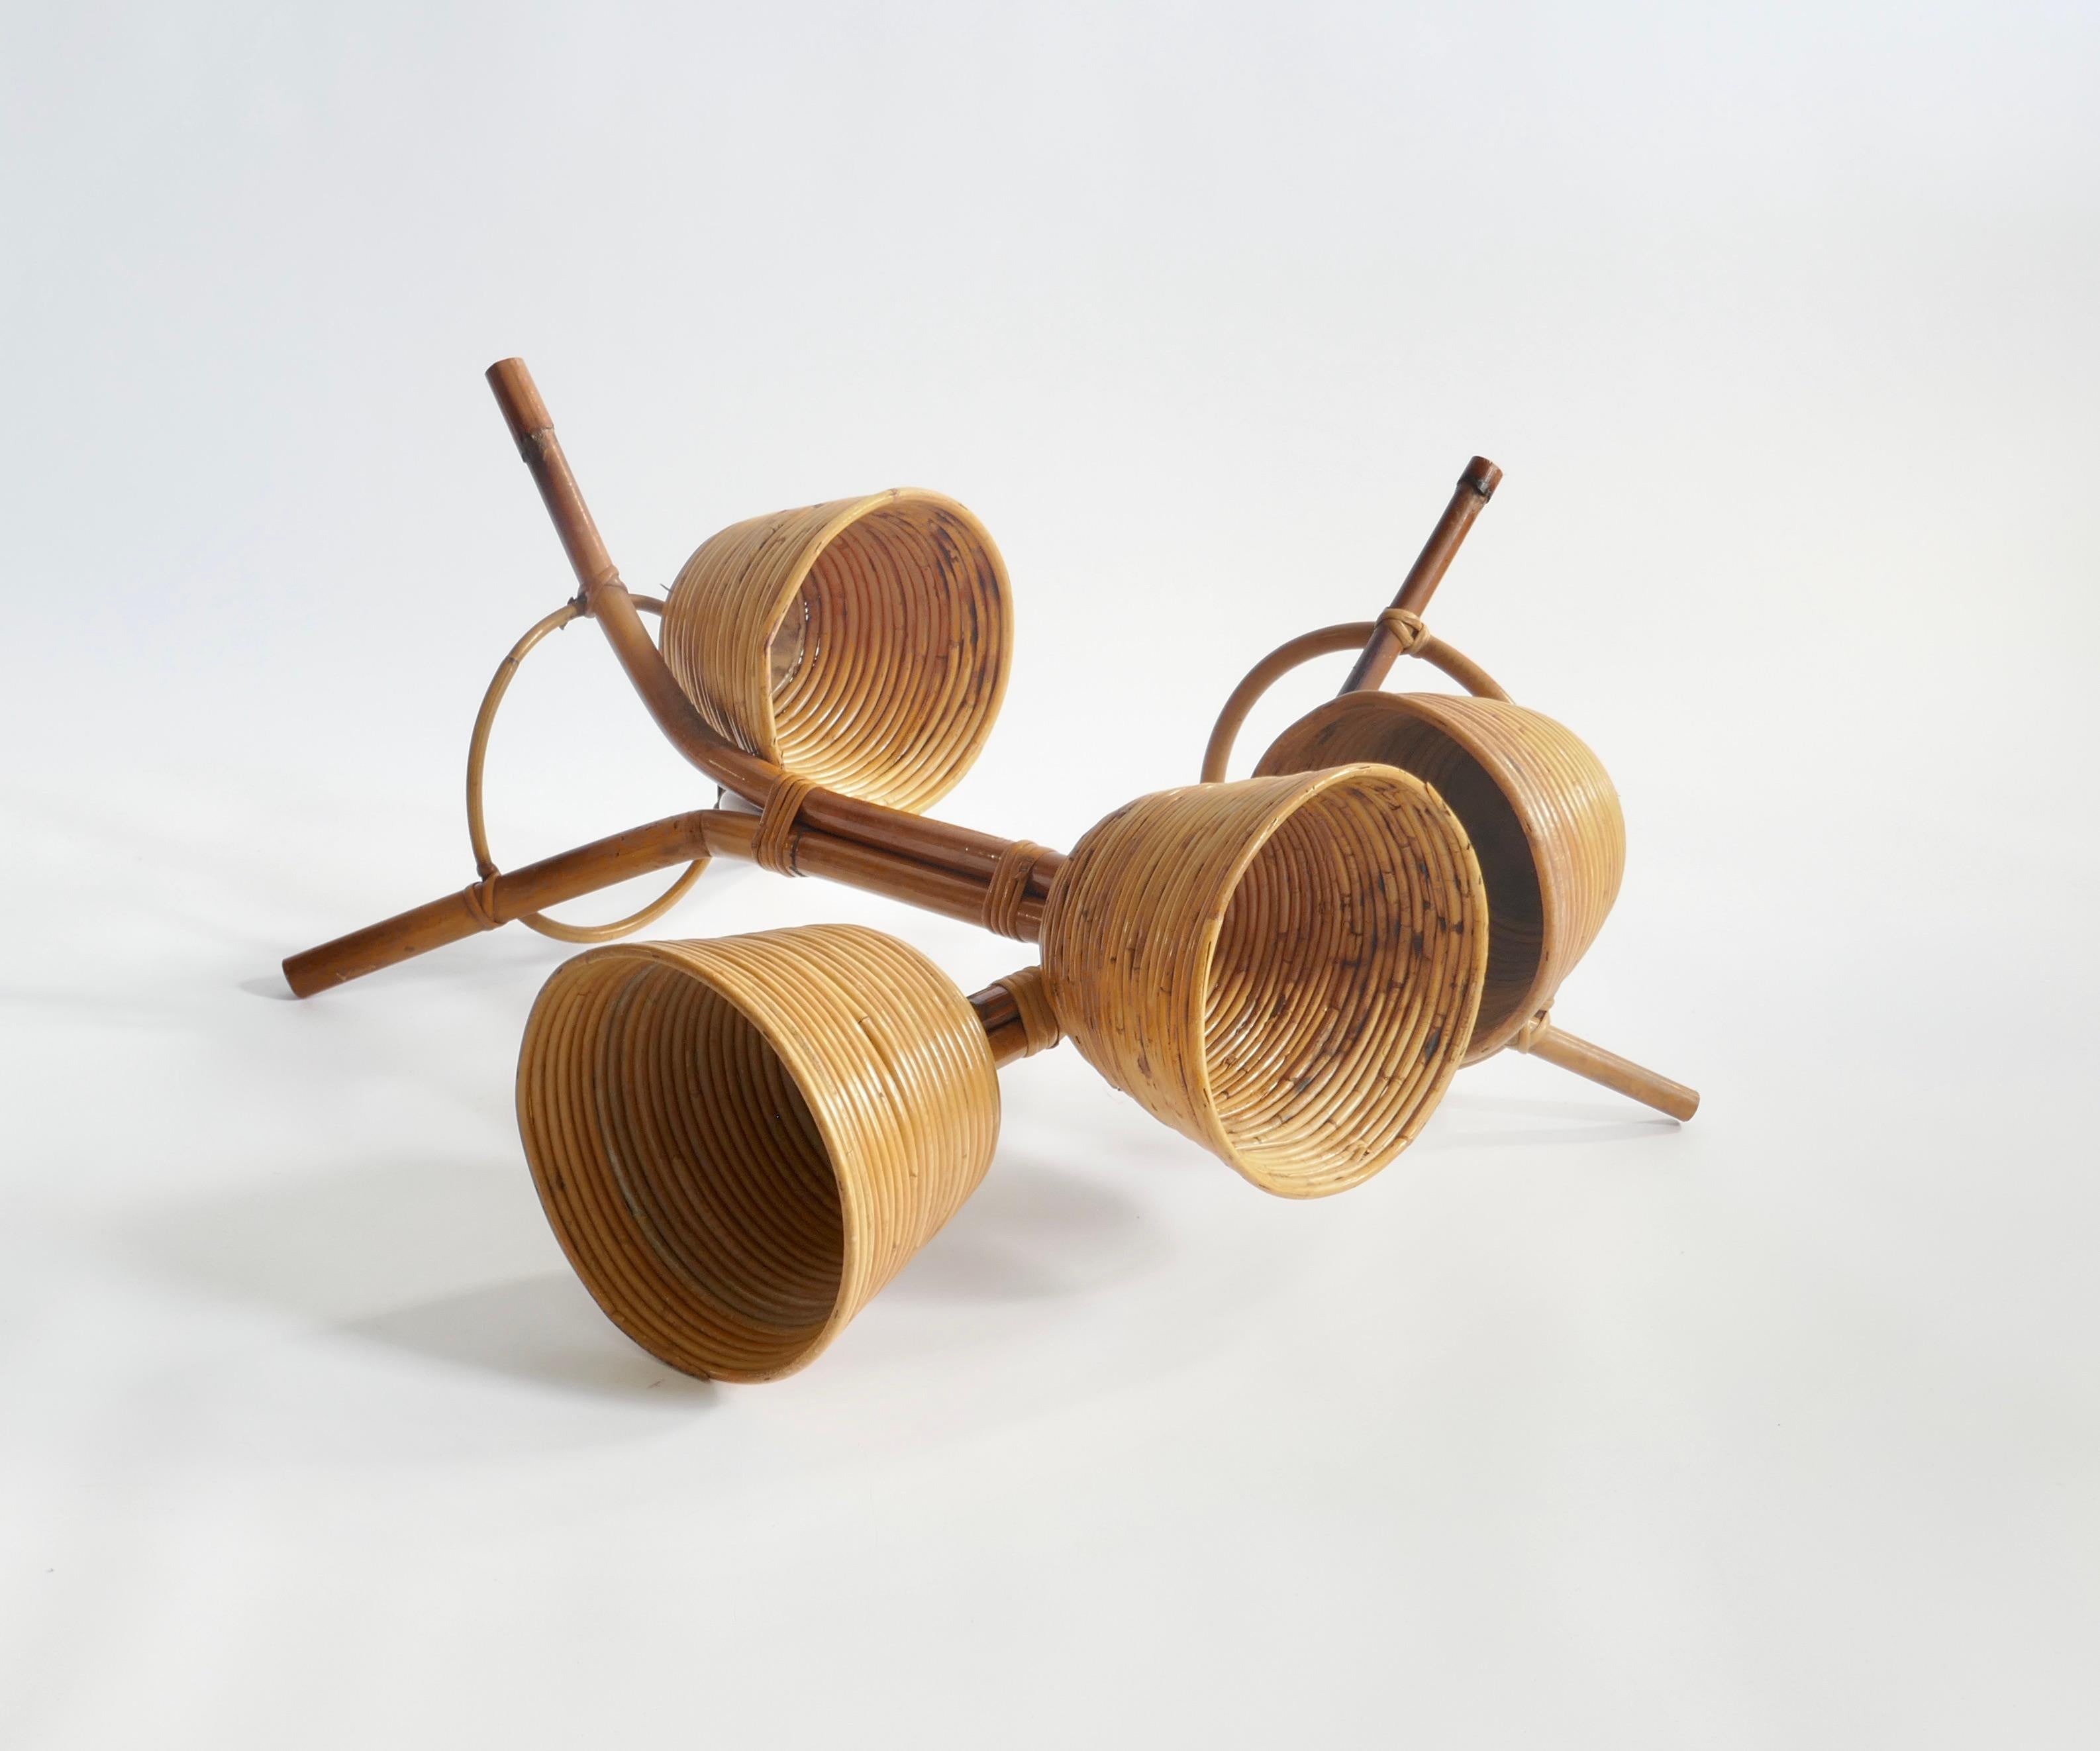 Set of 2 Bamboo and Rattan Plant Holders, Italy 1950s For Sale 1